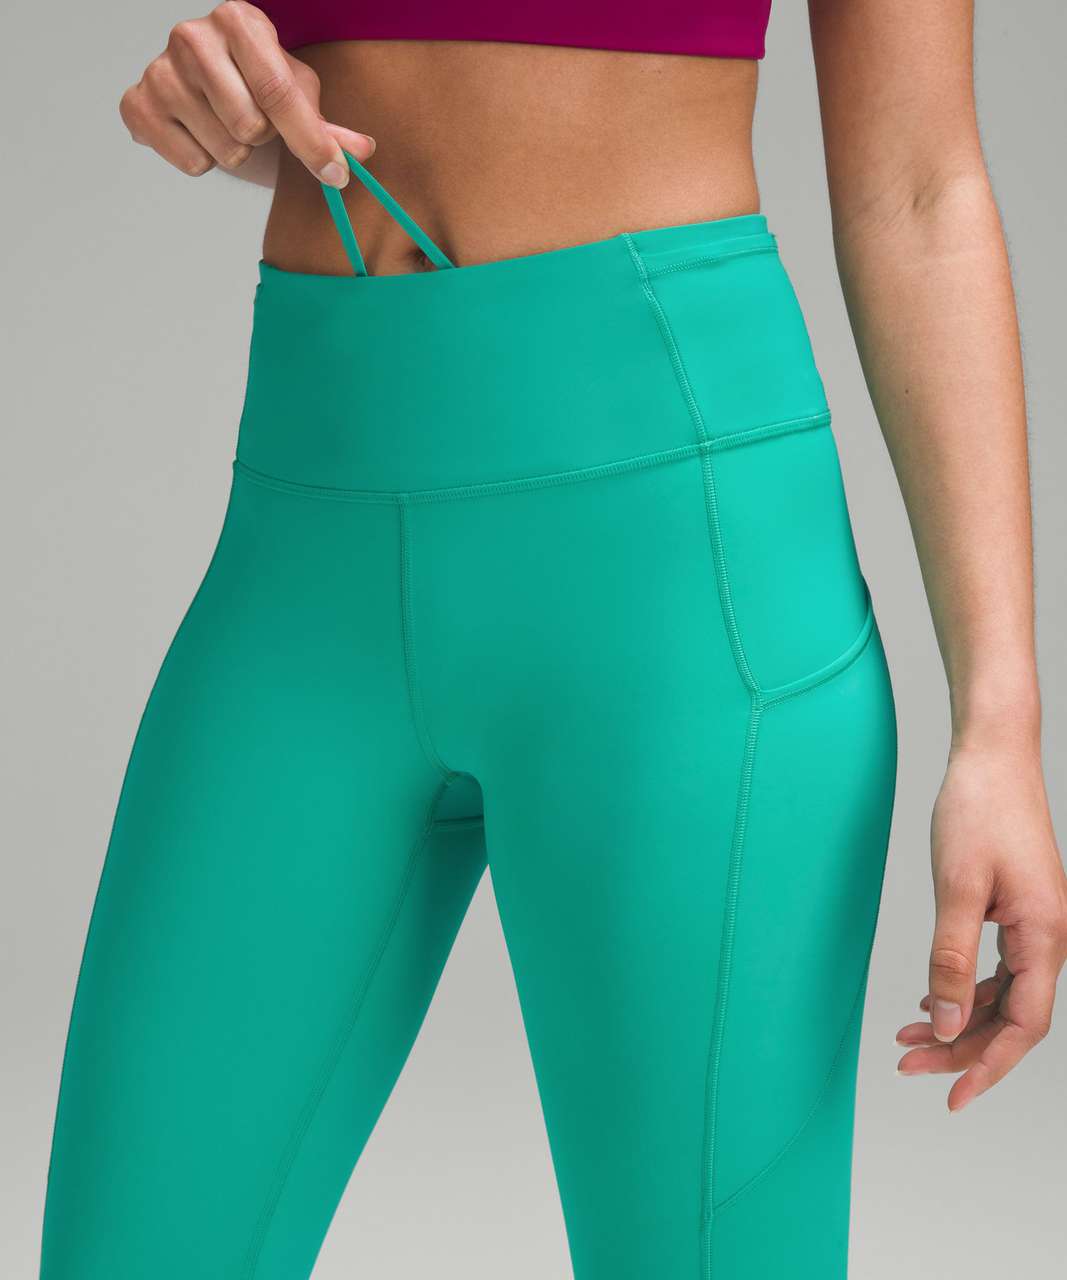 Lululemon Fast and Free High-Rise Tight 25" - Maldives Green